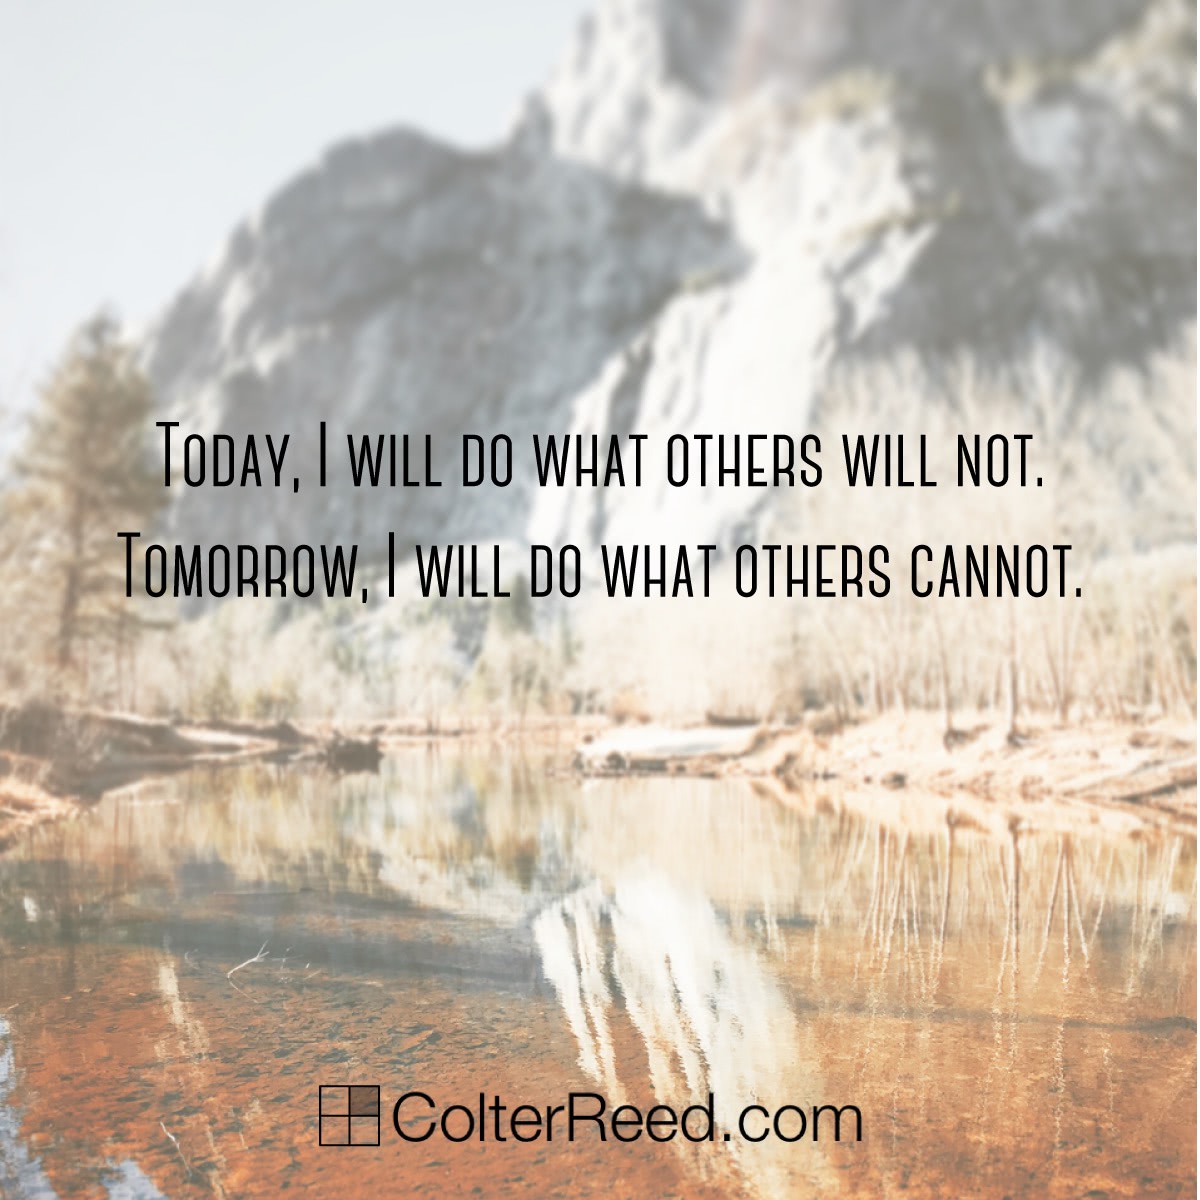 “Today, I will do what others will not. Tomorrow, I will do what others cannot.” —Unknown